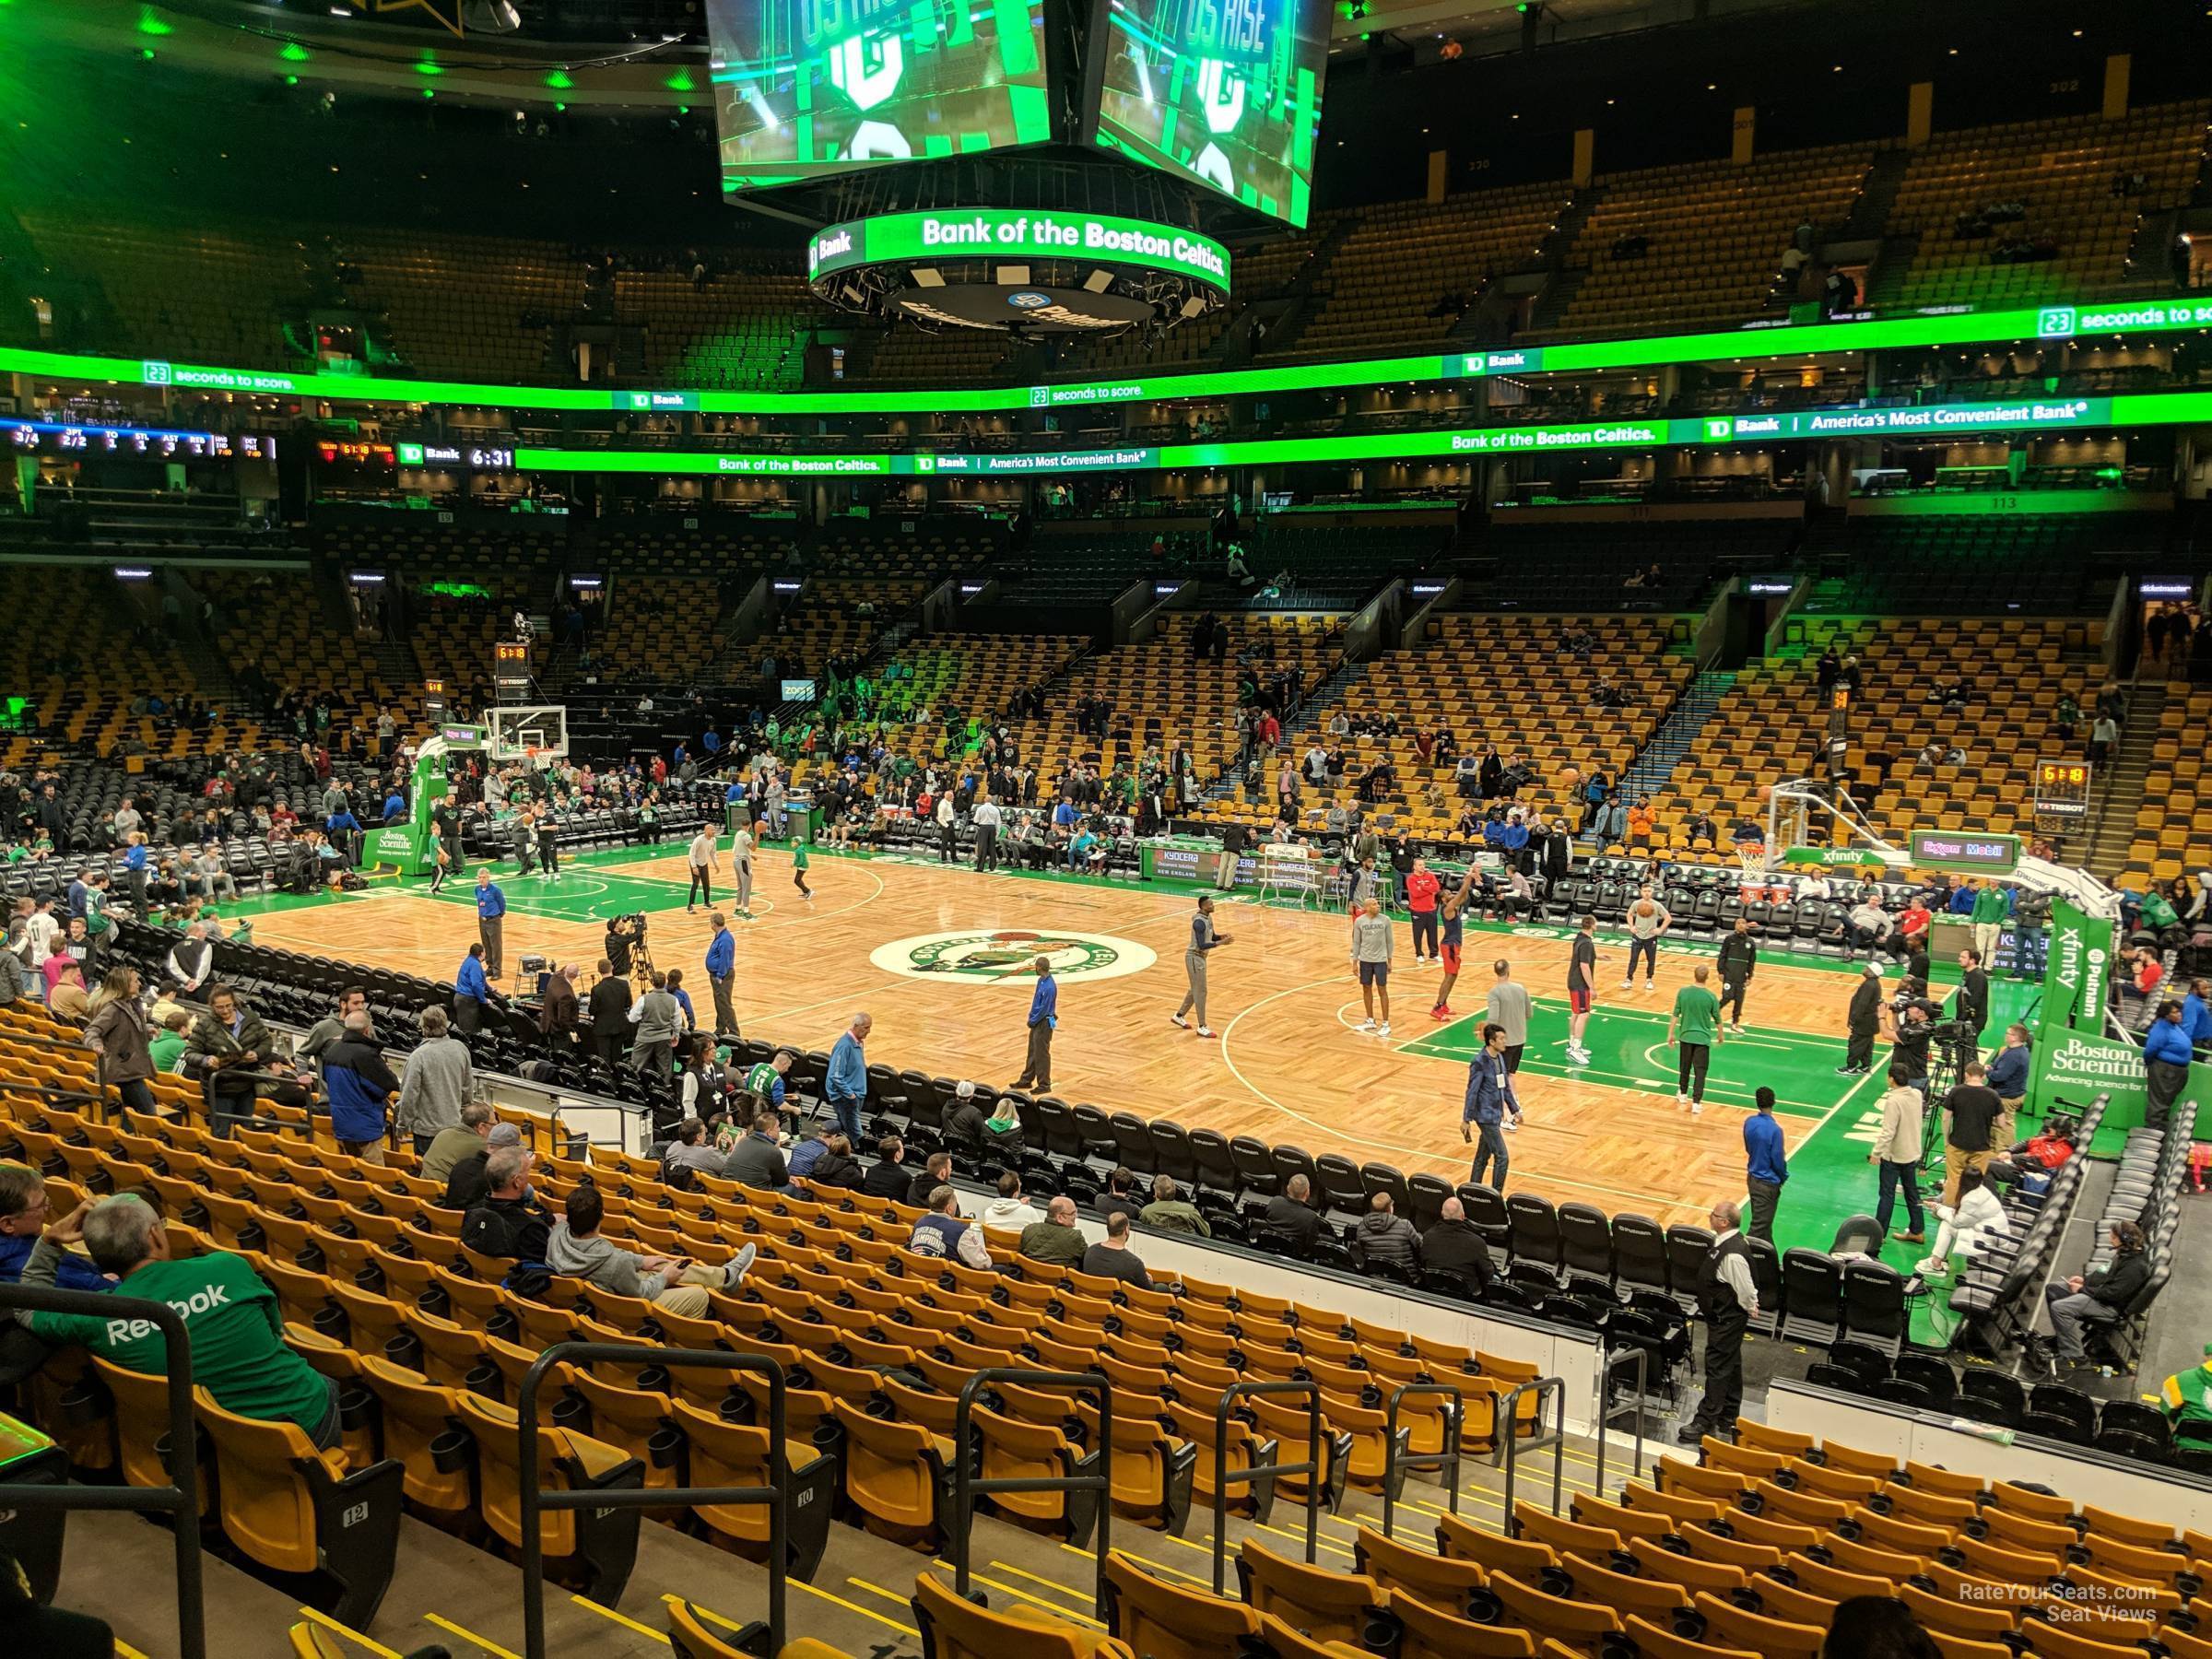 loge 10, row 15 seat view  for basketball - td garden